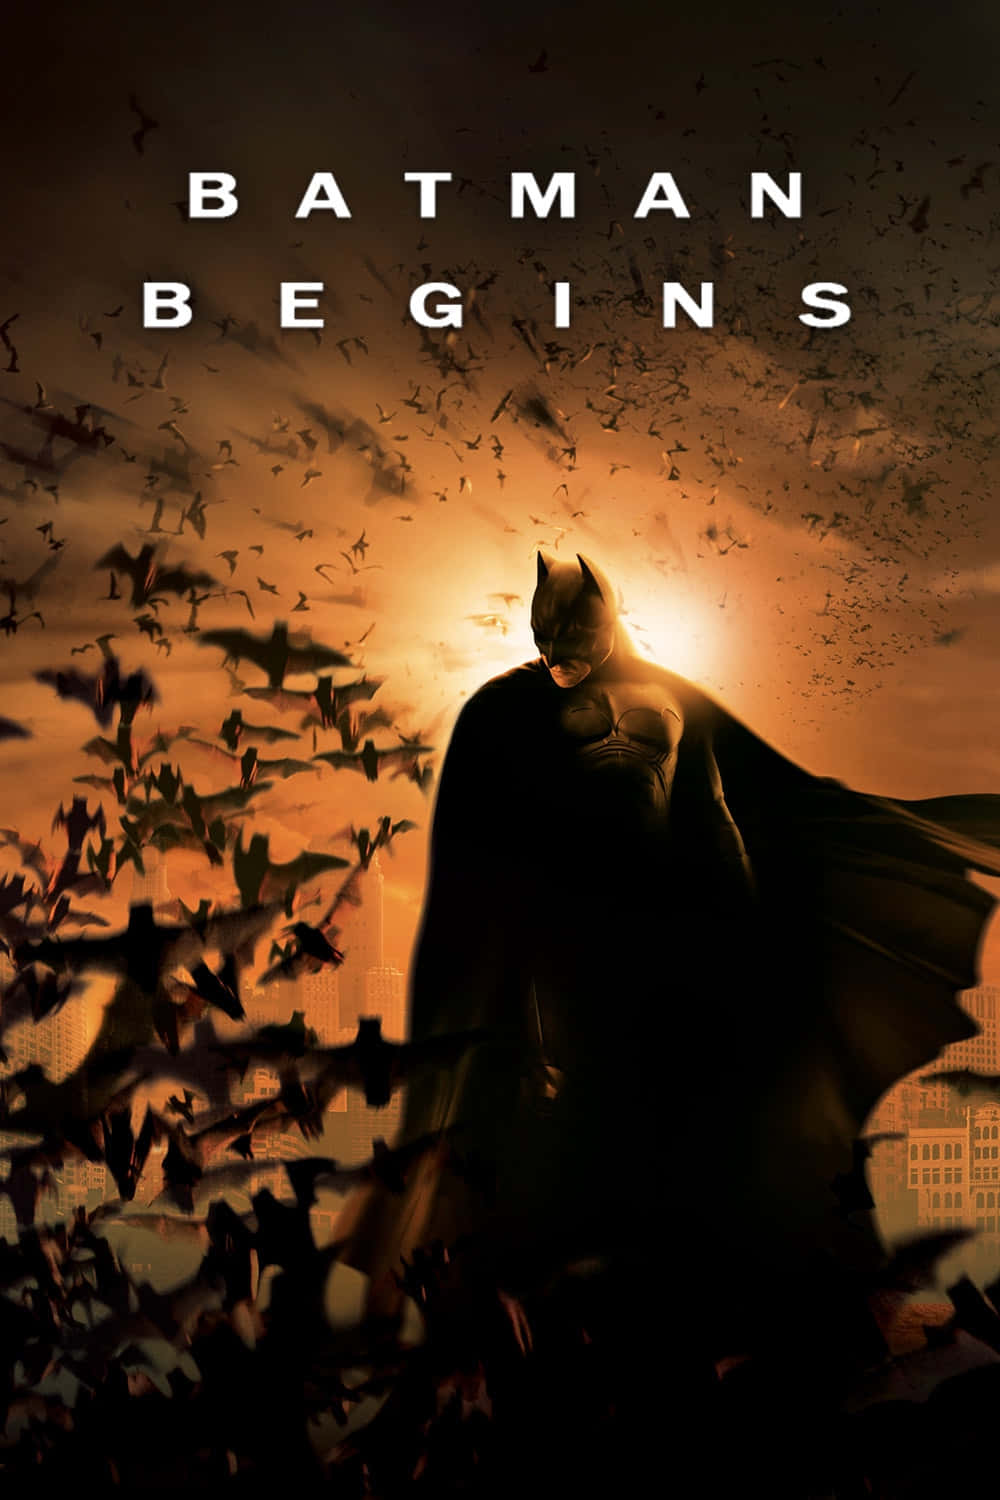 Captivating poster of Batman Begins with the bat symbol and Gotham City in the background Wallpaper